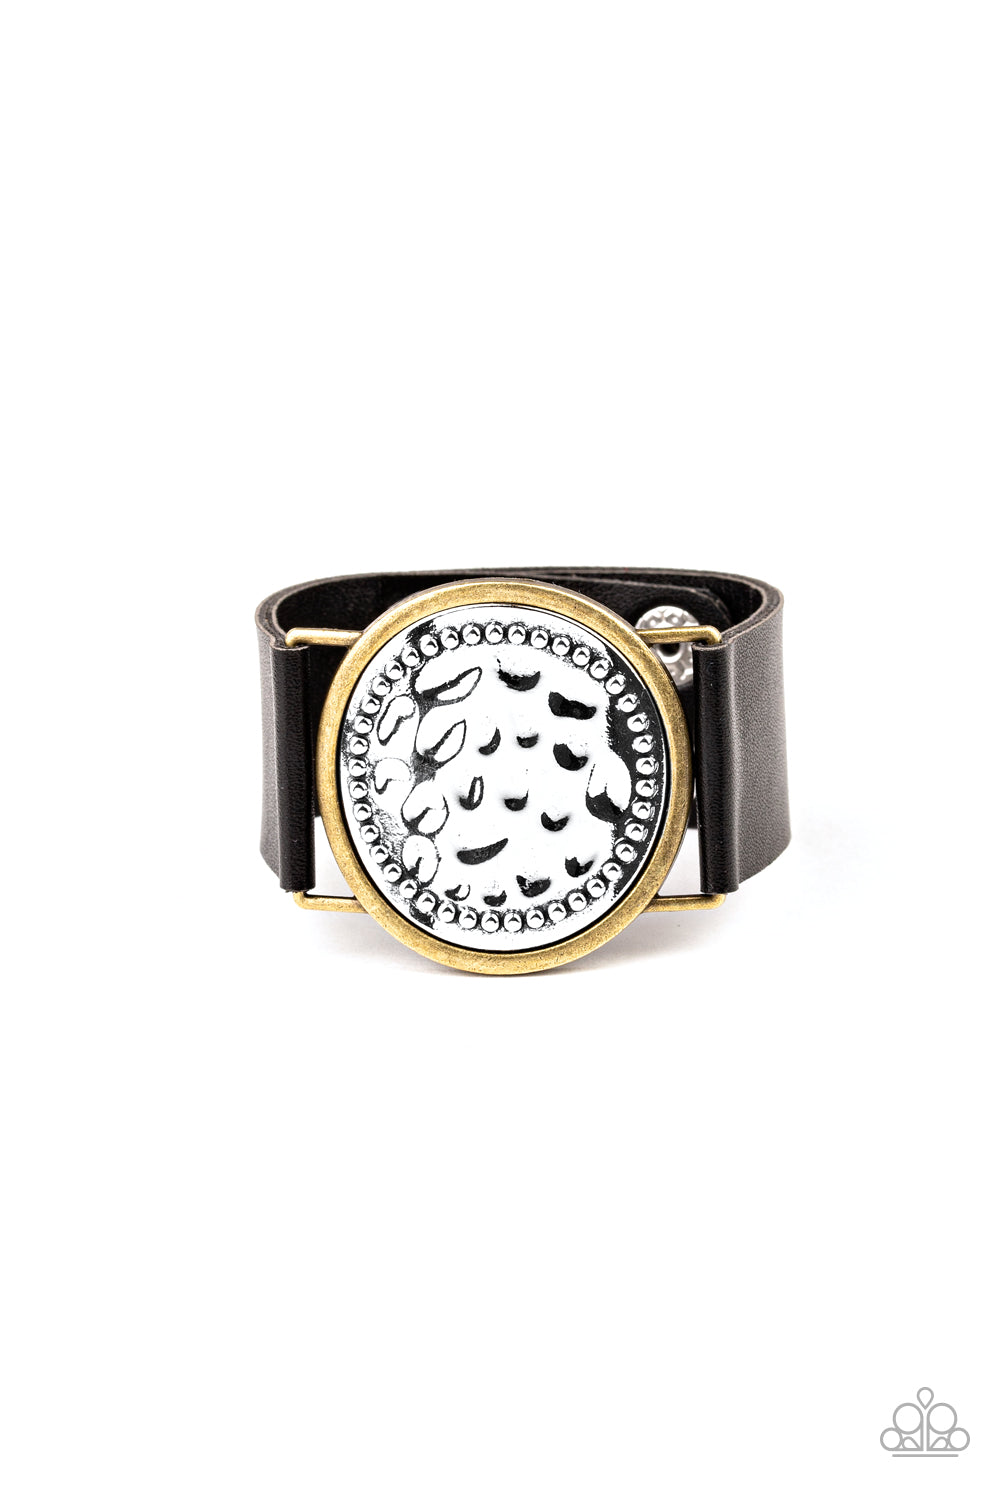 Hold On To Your Buckle - Black Leather Bracelet - Paparazzi Accessories - Bordered in brass, a hammered silver frame attaches to a thick black leather band for a rustic look. Features an adjustable snap closure. Sold as one individual bracelet.